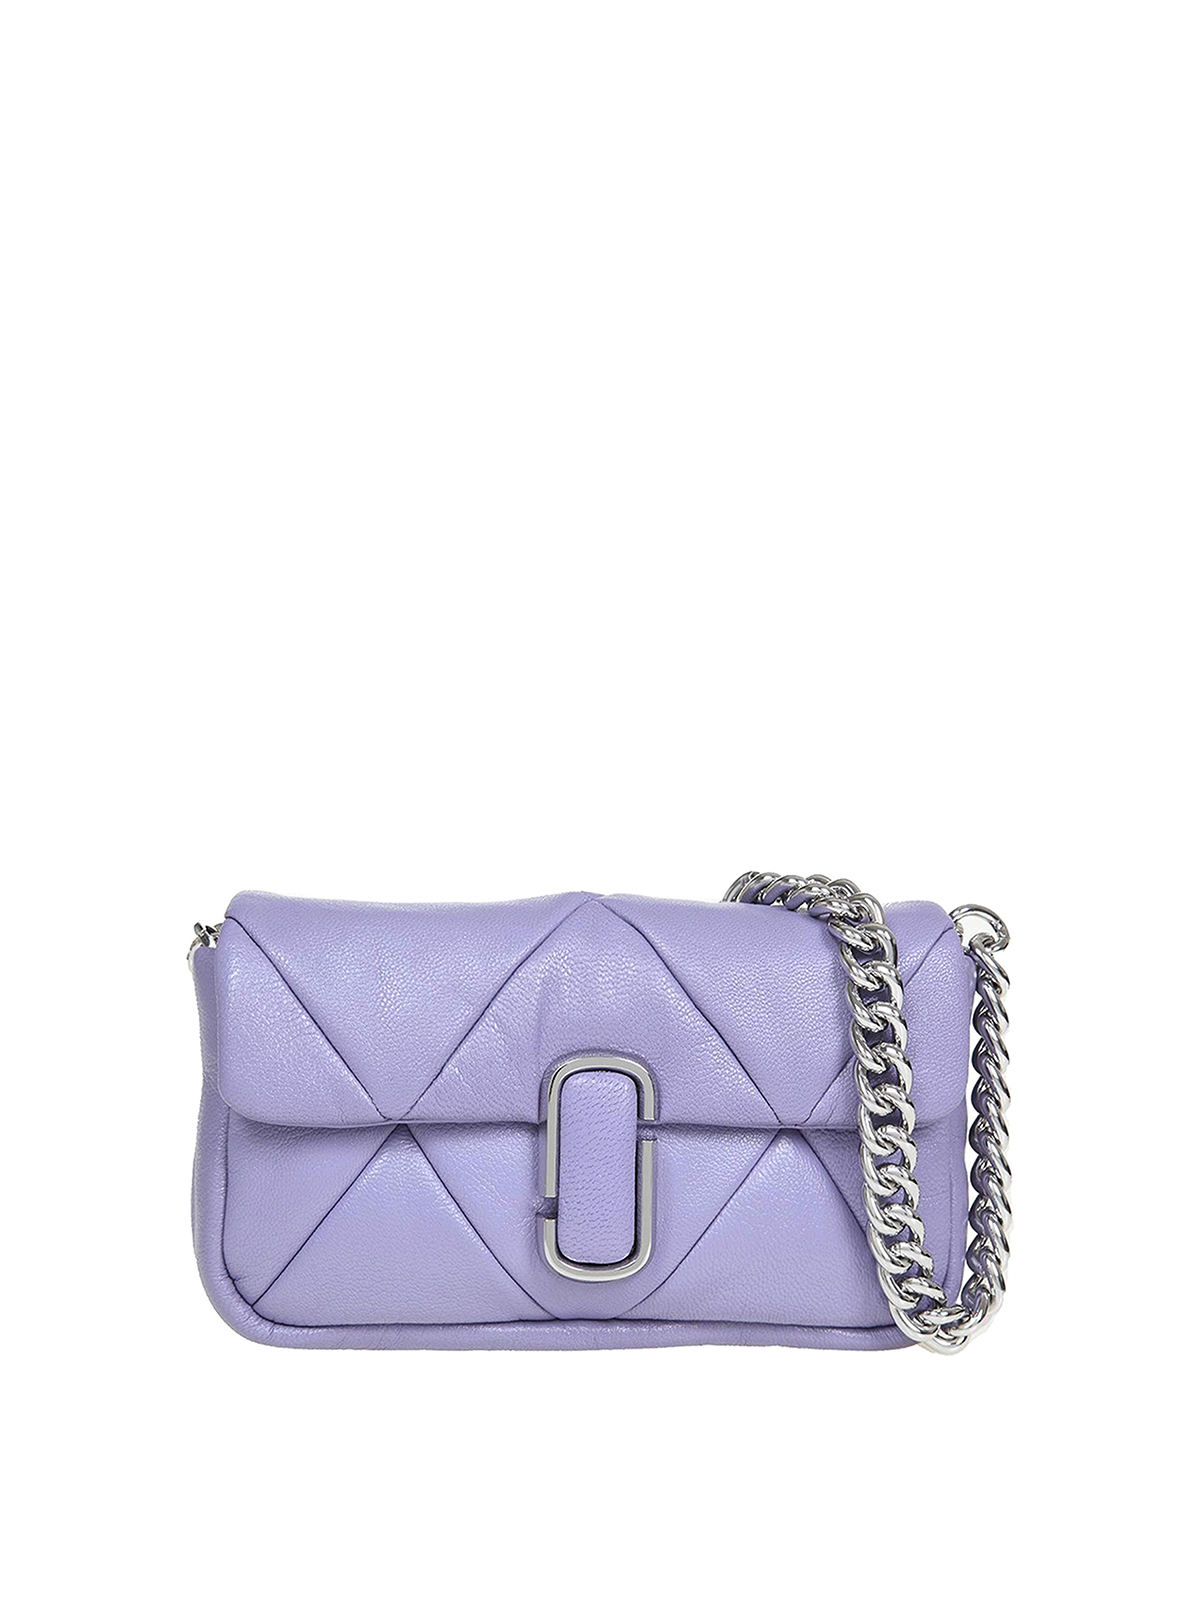 MARC JACOBS QUILTED LEATHER SHOULDER BAG WITH LOGO